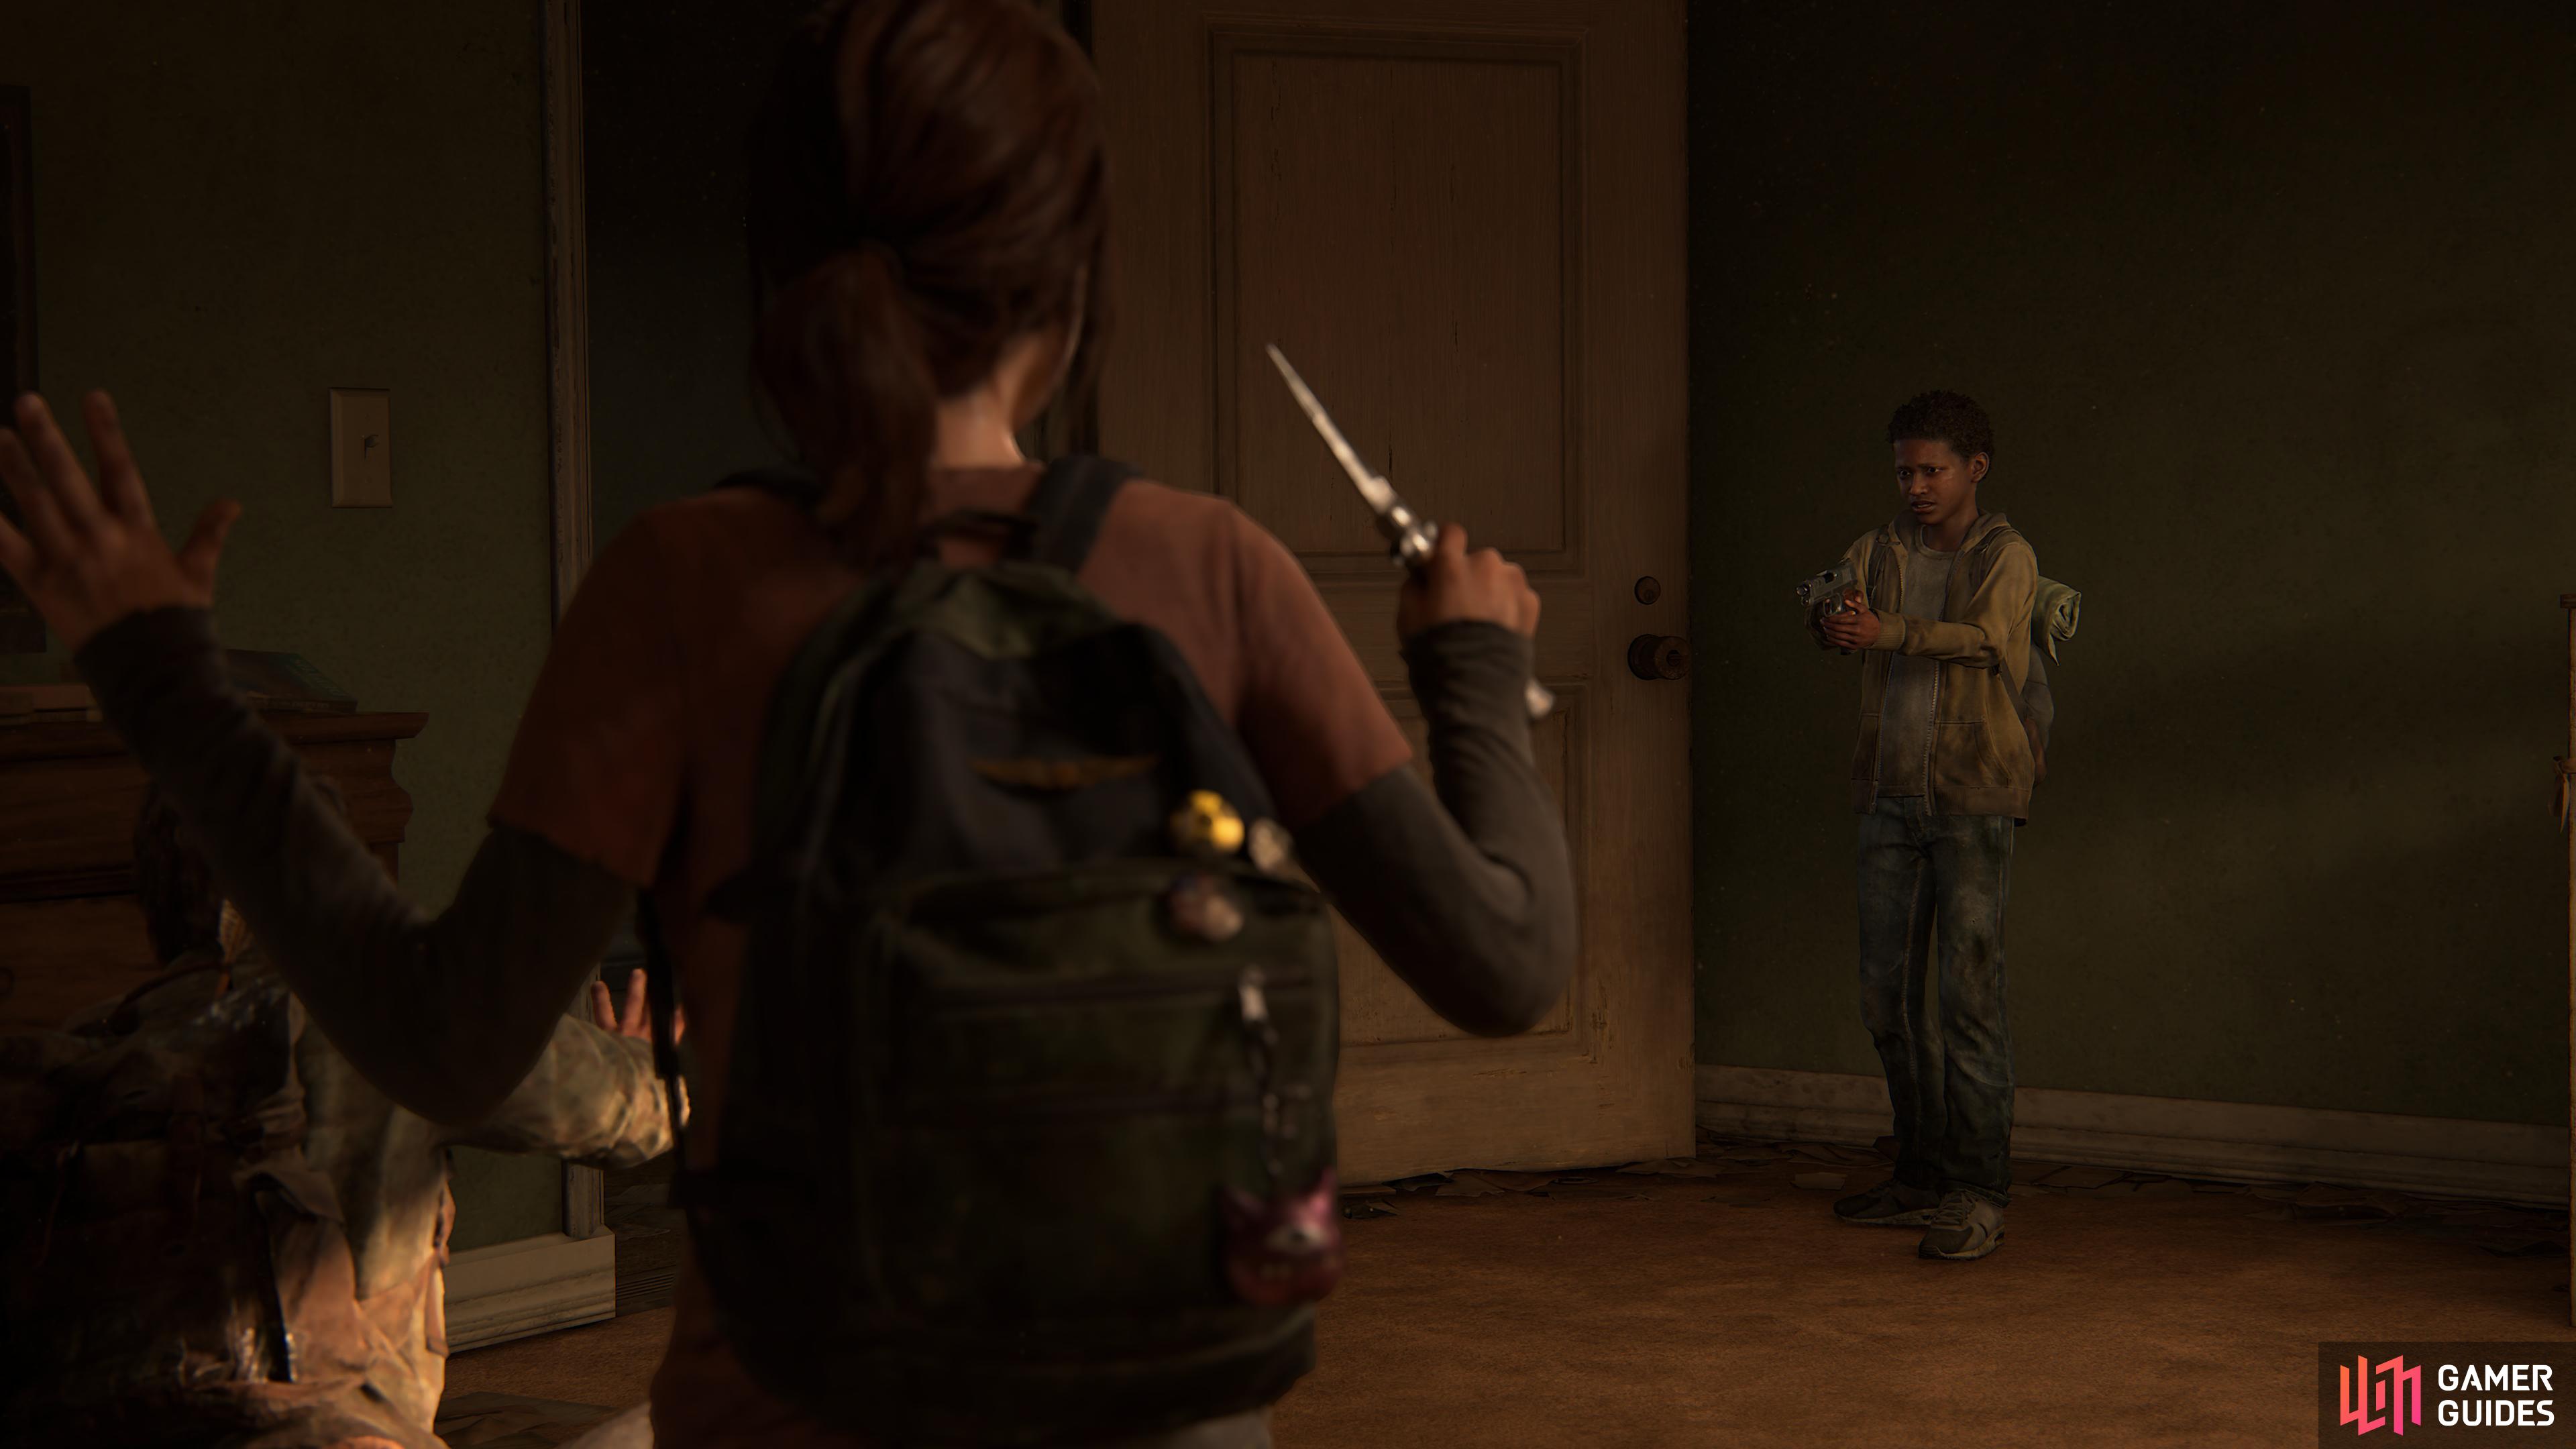 Ellie and Joel find themselves held at gunpoint.